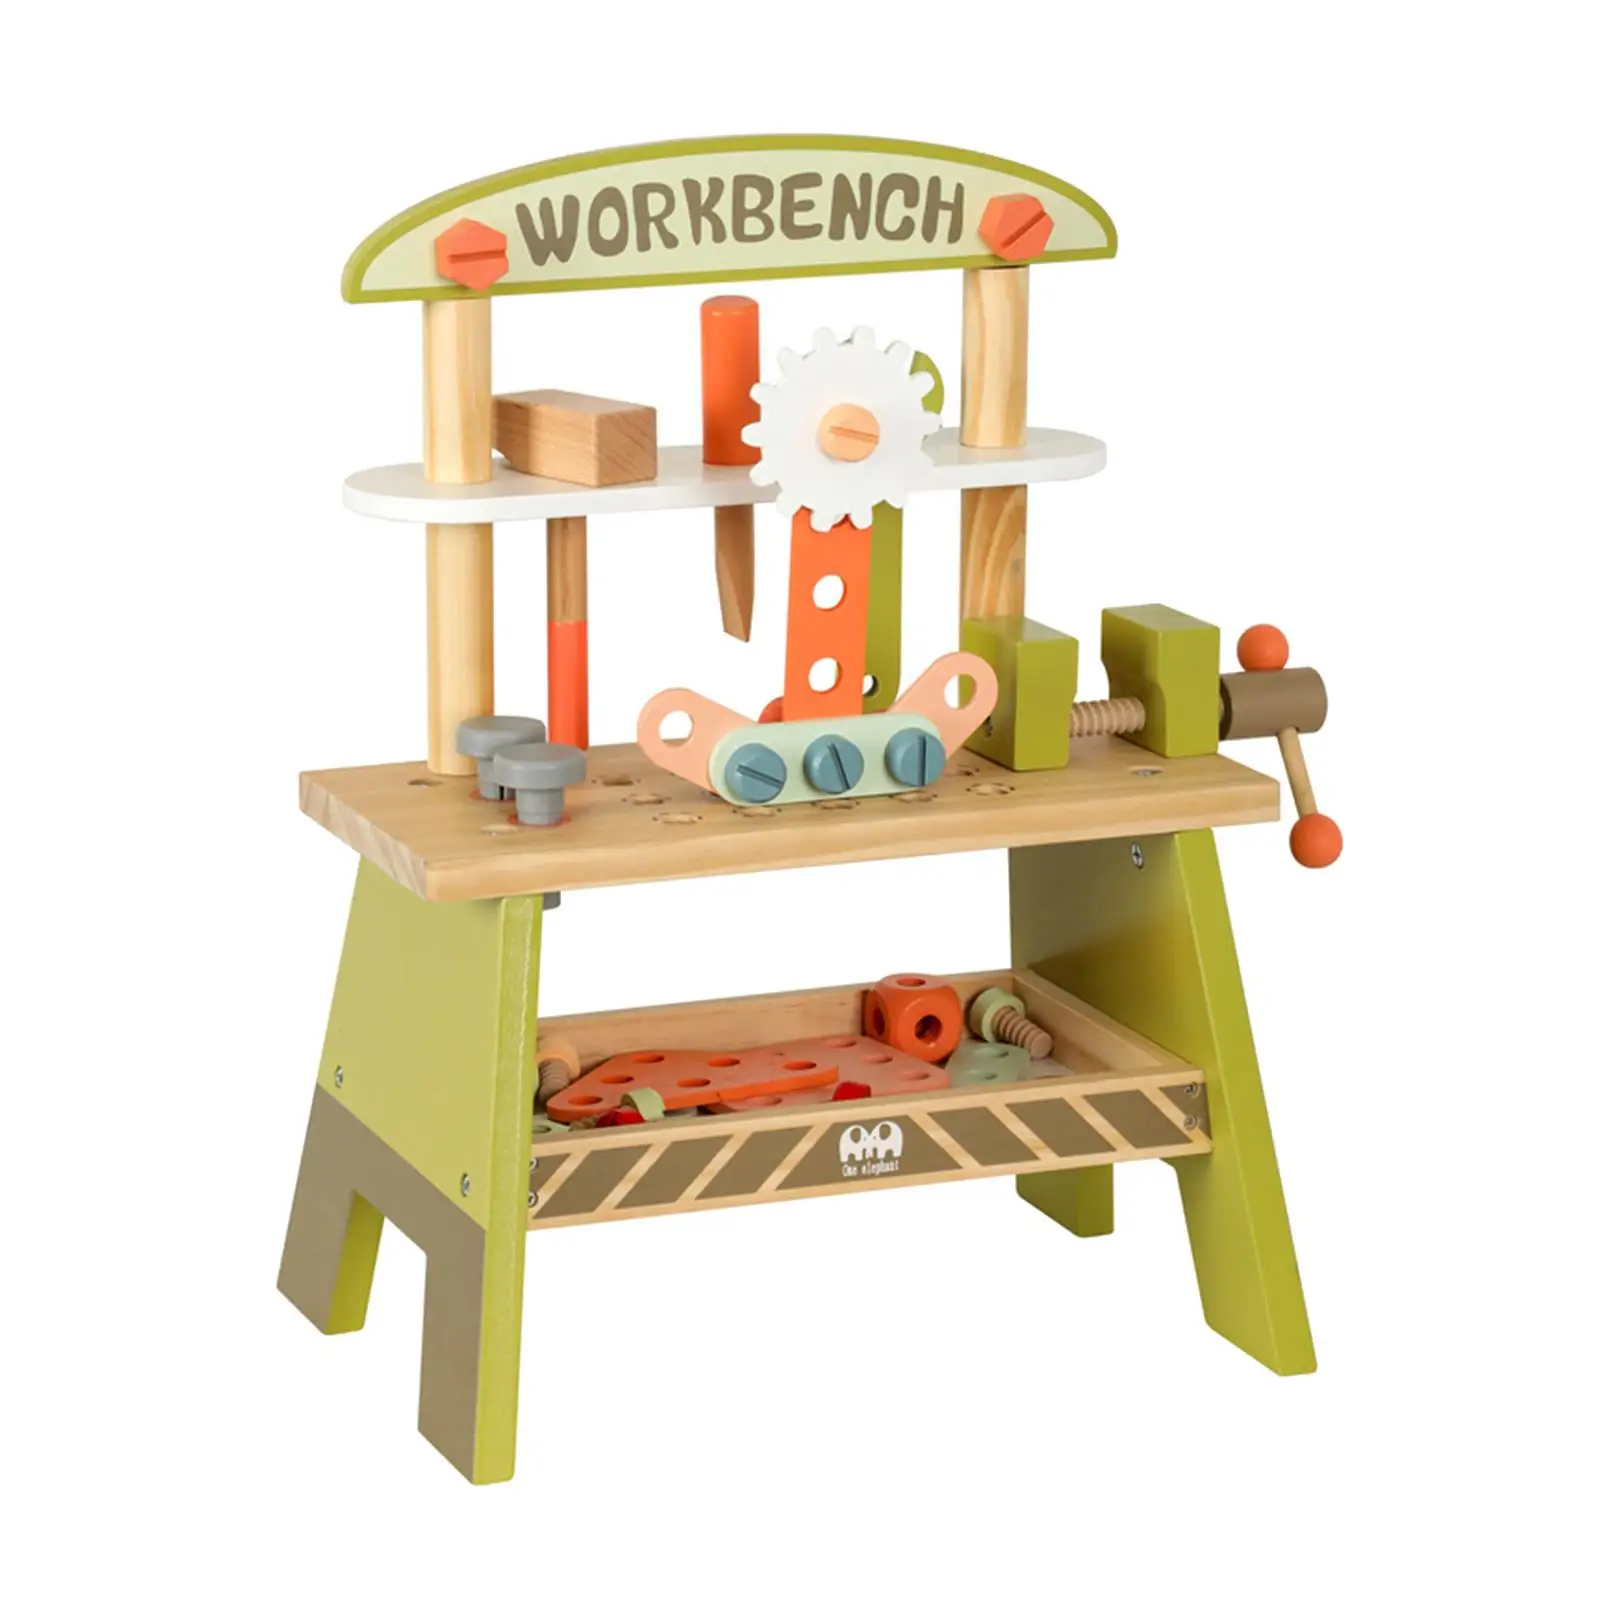 Small Wooden Kid Workbench Toy Montessori Toys DIY Kid`s Wooden Tool Bench Toy for Girls Boys 3 4 5 Years Old Holiday Present